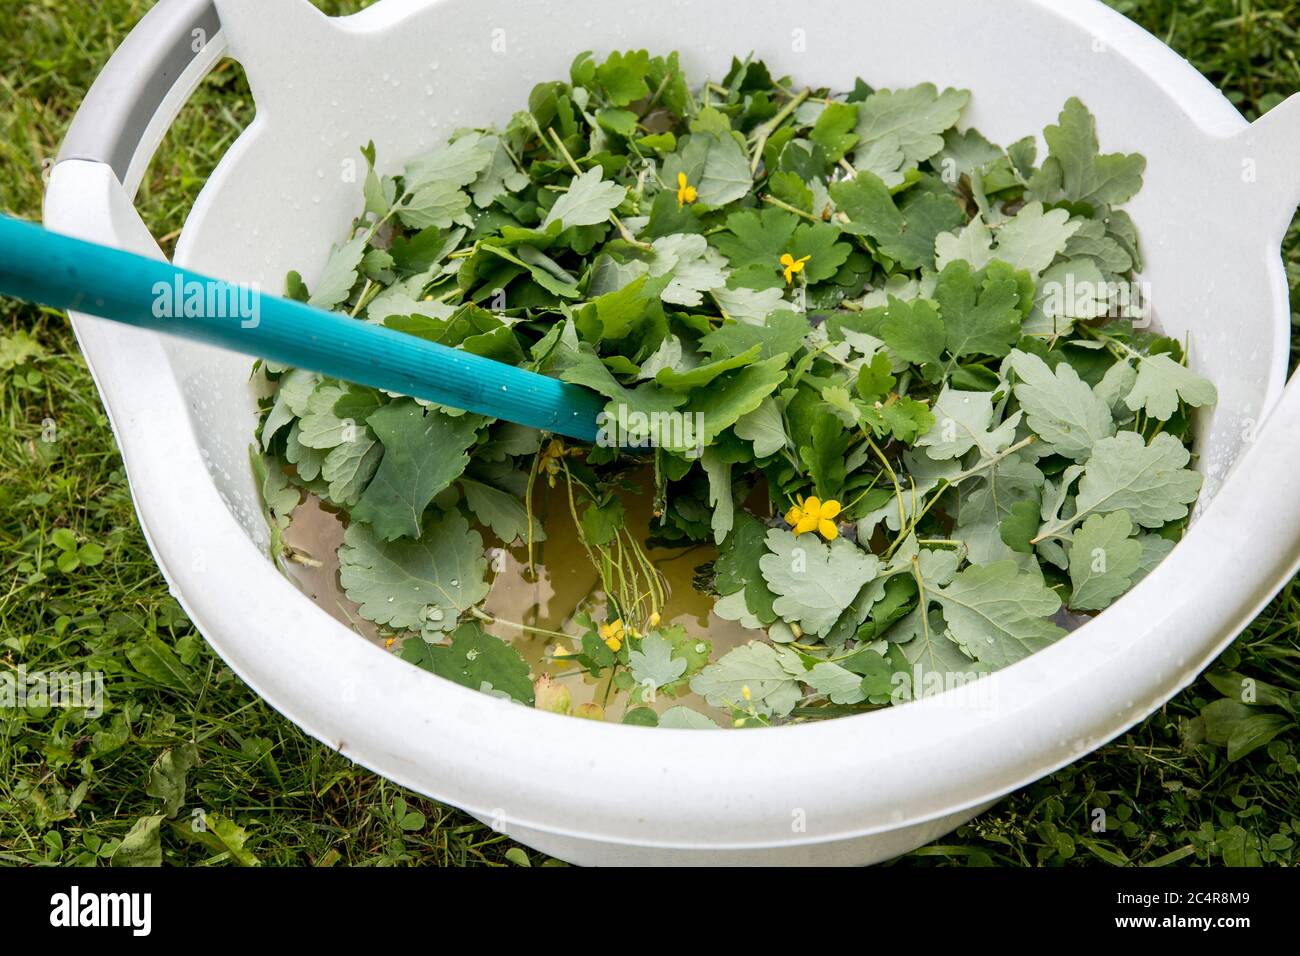 Chelidonium majus leaves( also known:greater celandine, nipplewort, swallowwort or tetterwort) soaking in water to make non toxic inscect repellent. Stock Photo